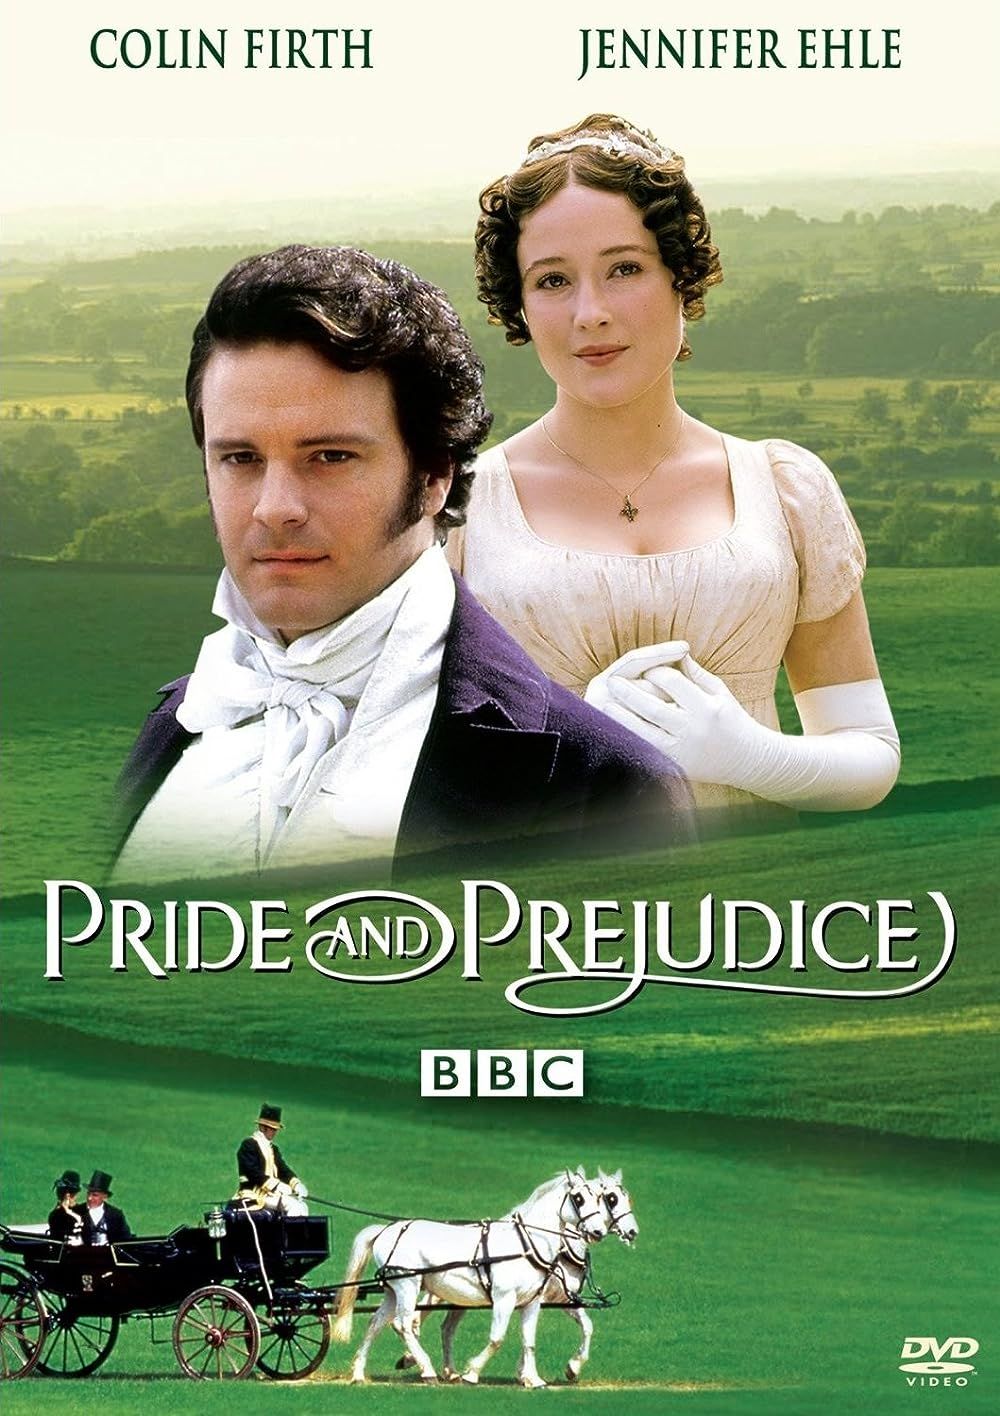 Colin Firth and Jennifer Ehle on the poster of Pride and Prejudice